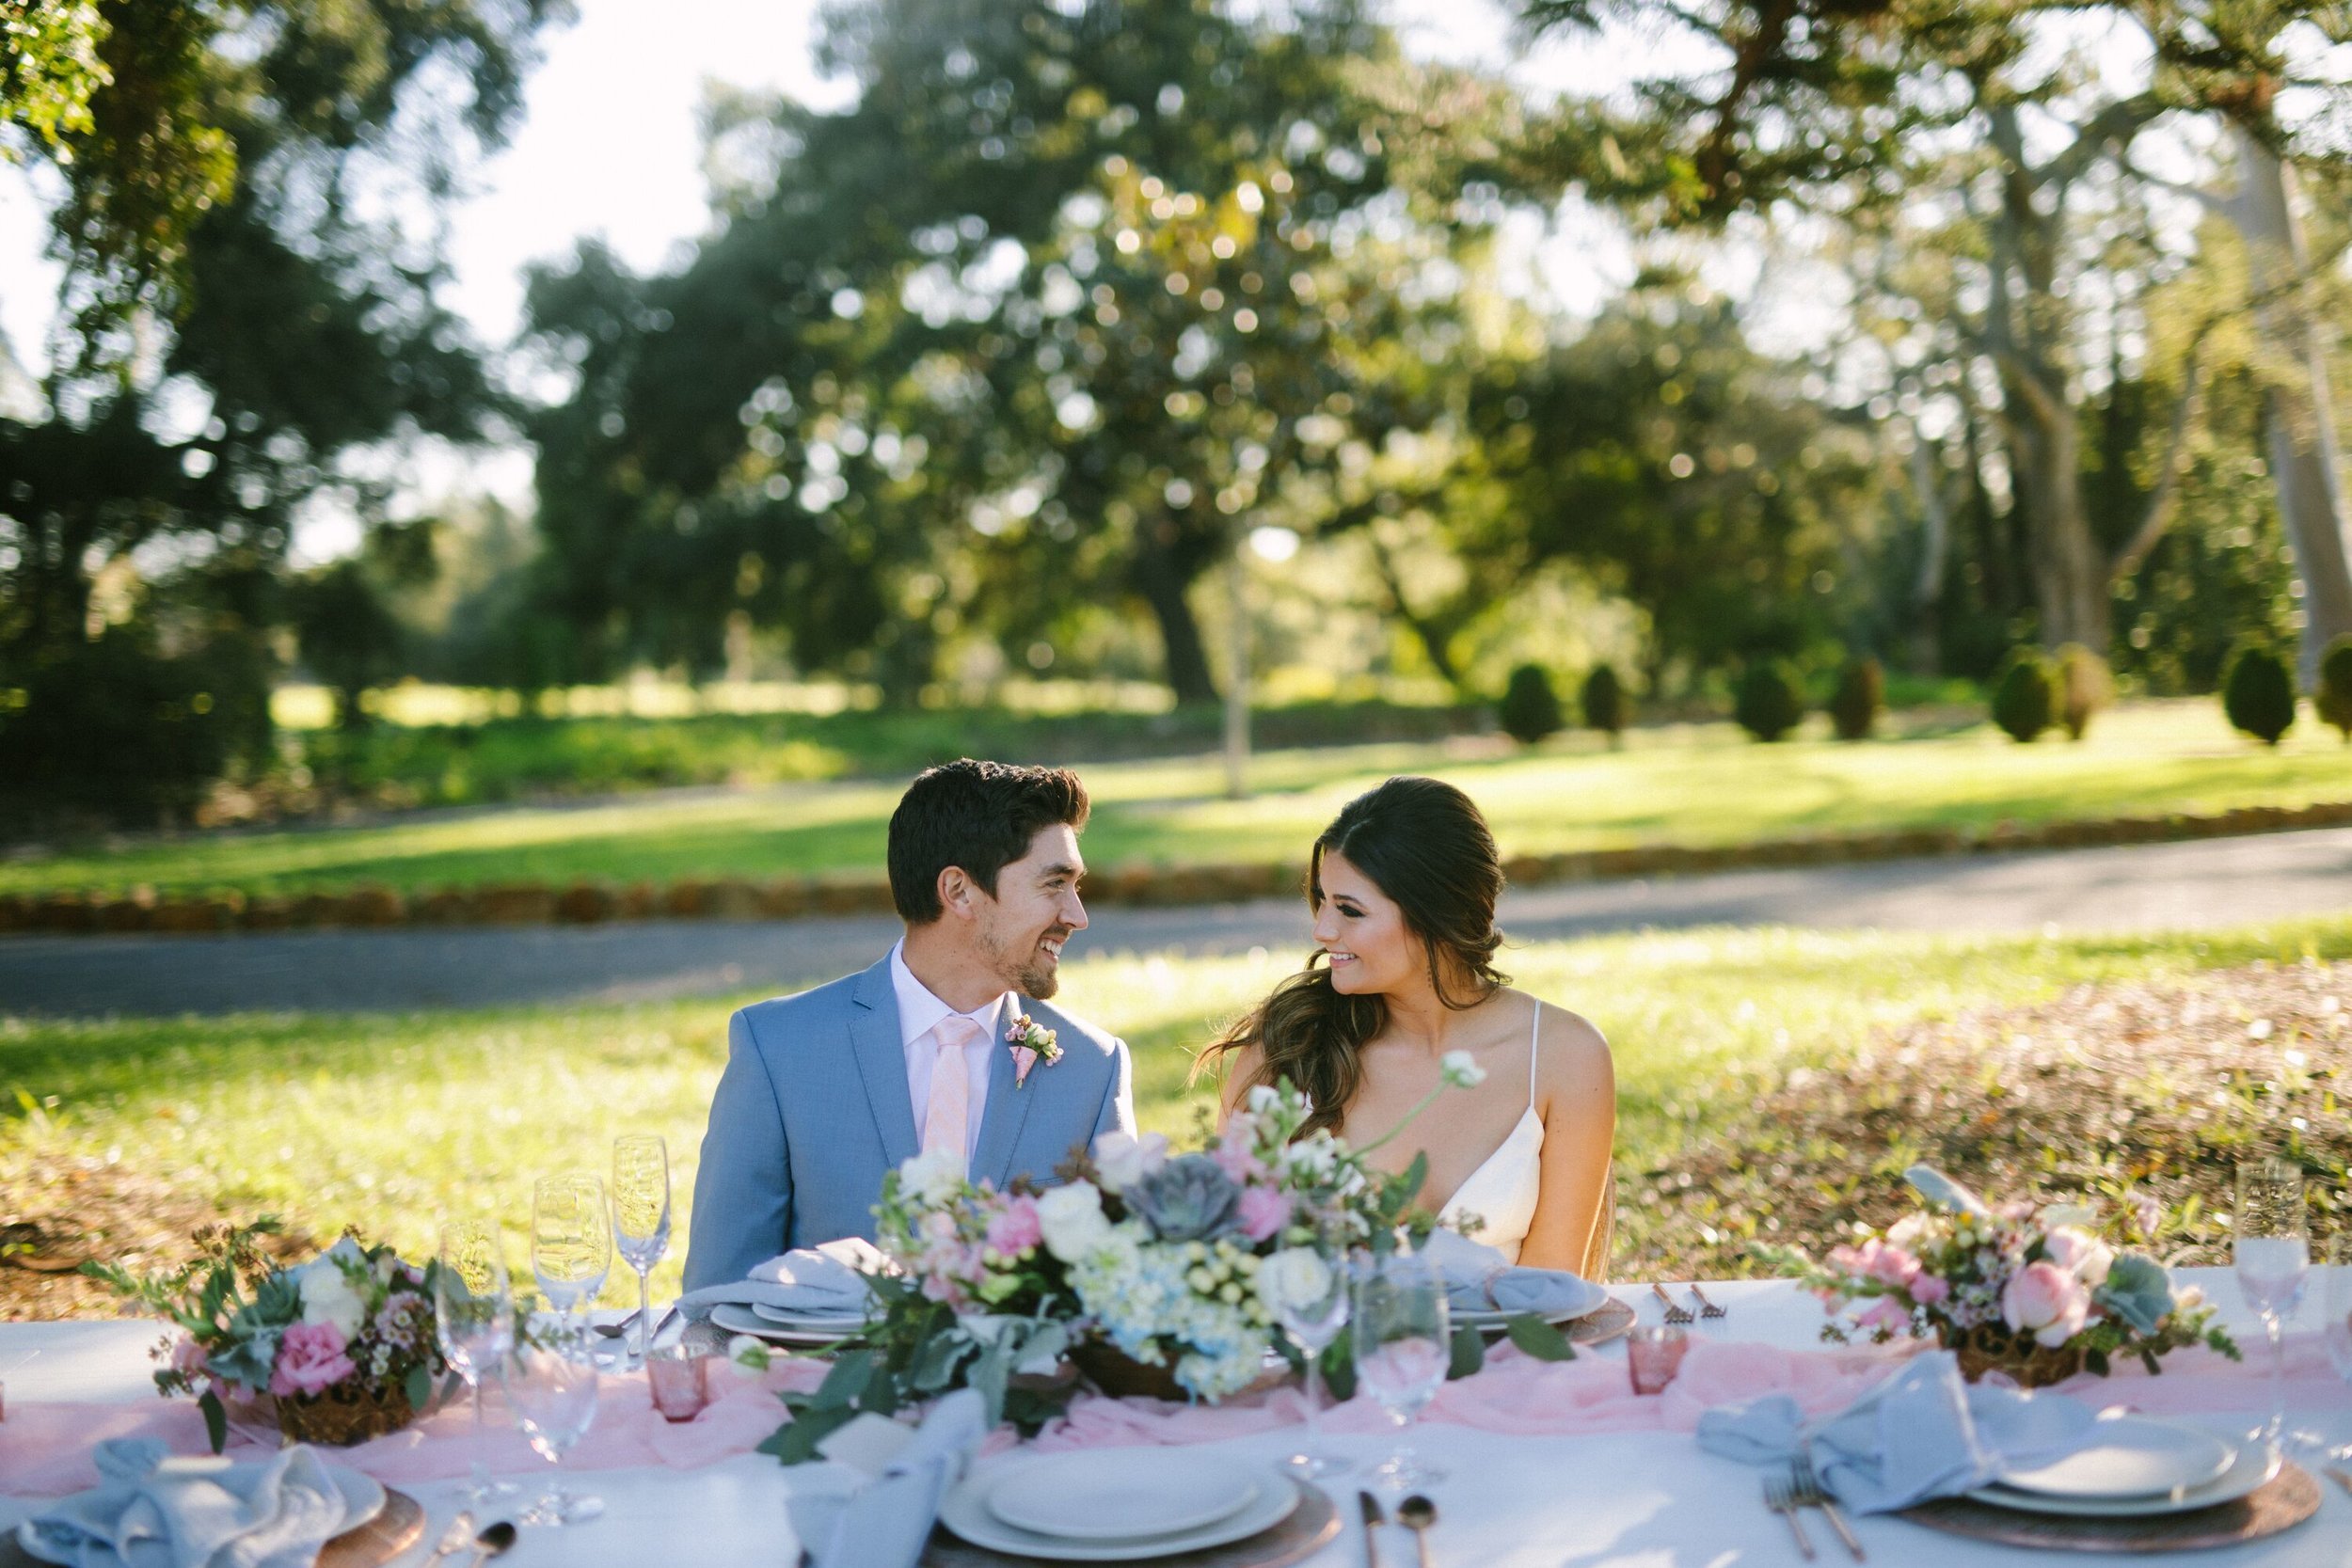 www.santabarbarawedding.com | Photographer: Patrick Ang | Venue: Rancho La Patera &amp; Stow House | Wedding Planner: Elyse Rowen of Elyse Events | Bride and Groom at Table